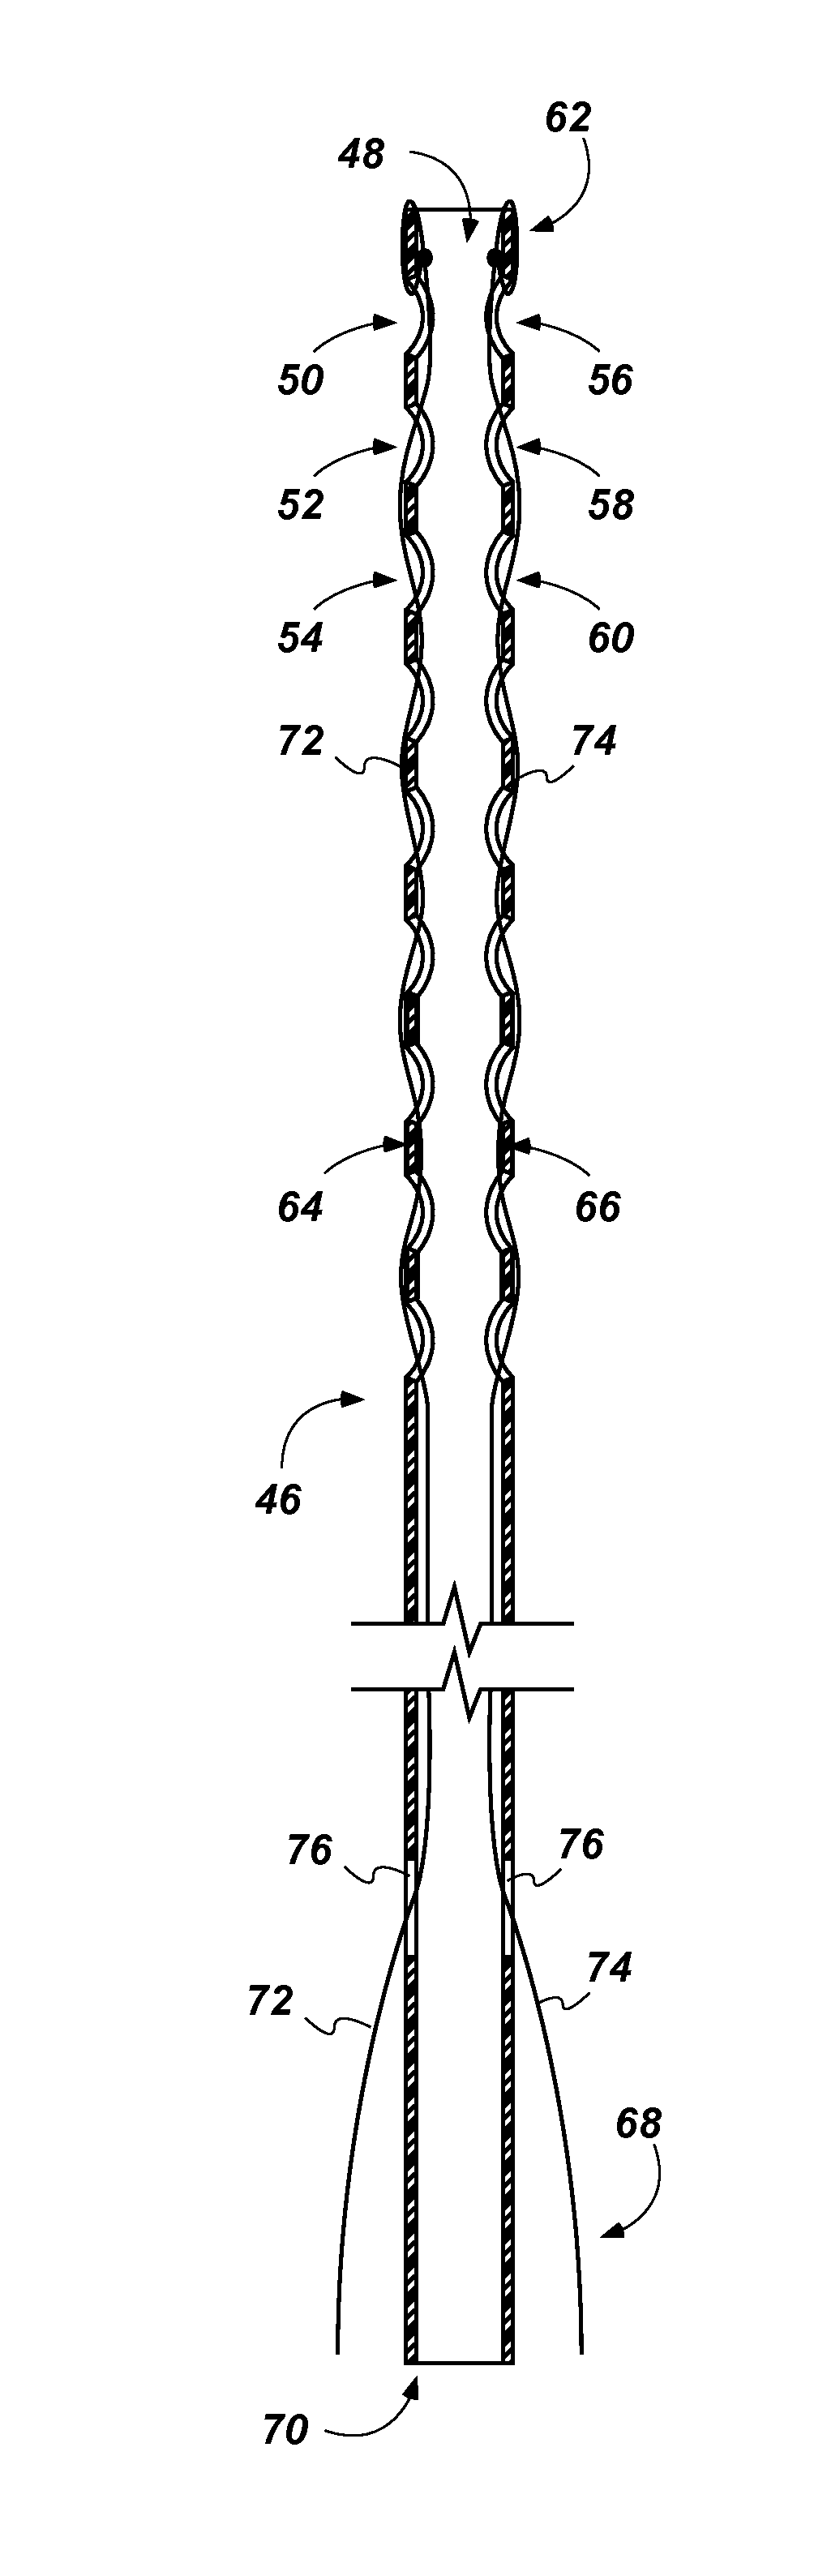 Body cavity drainage devices and related methods